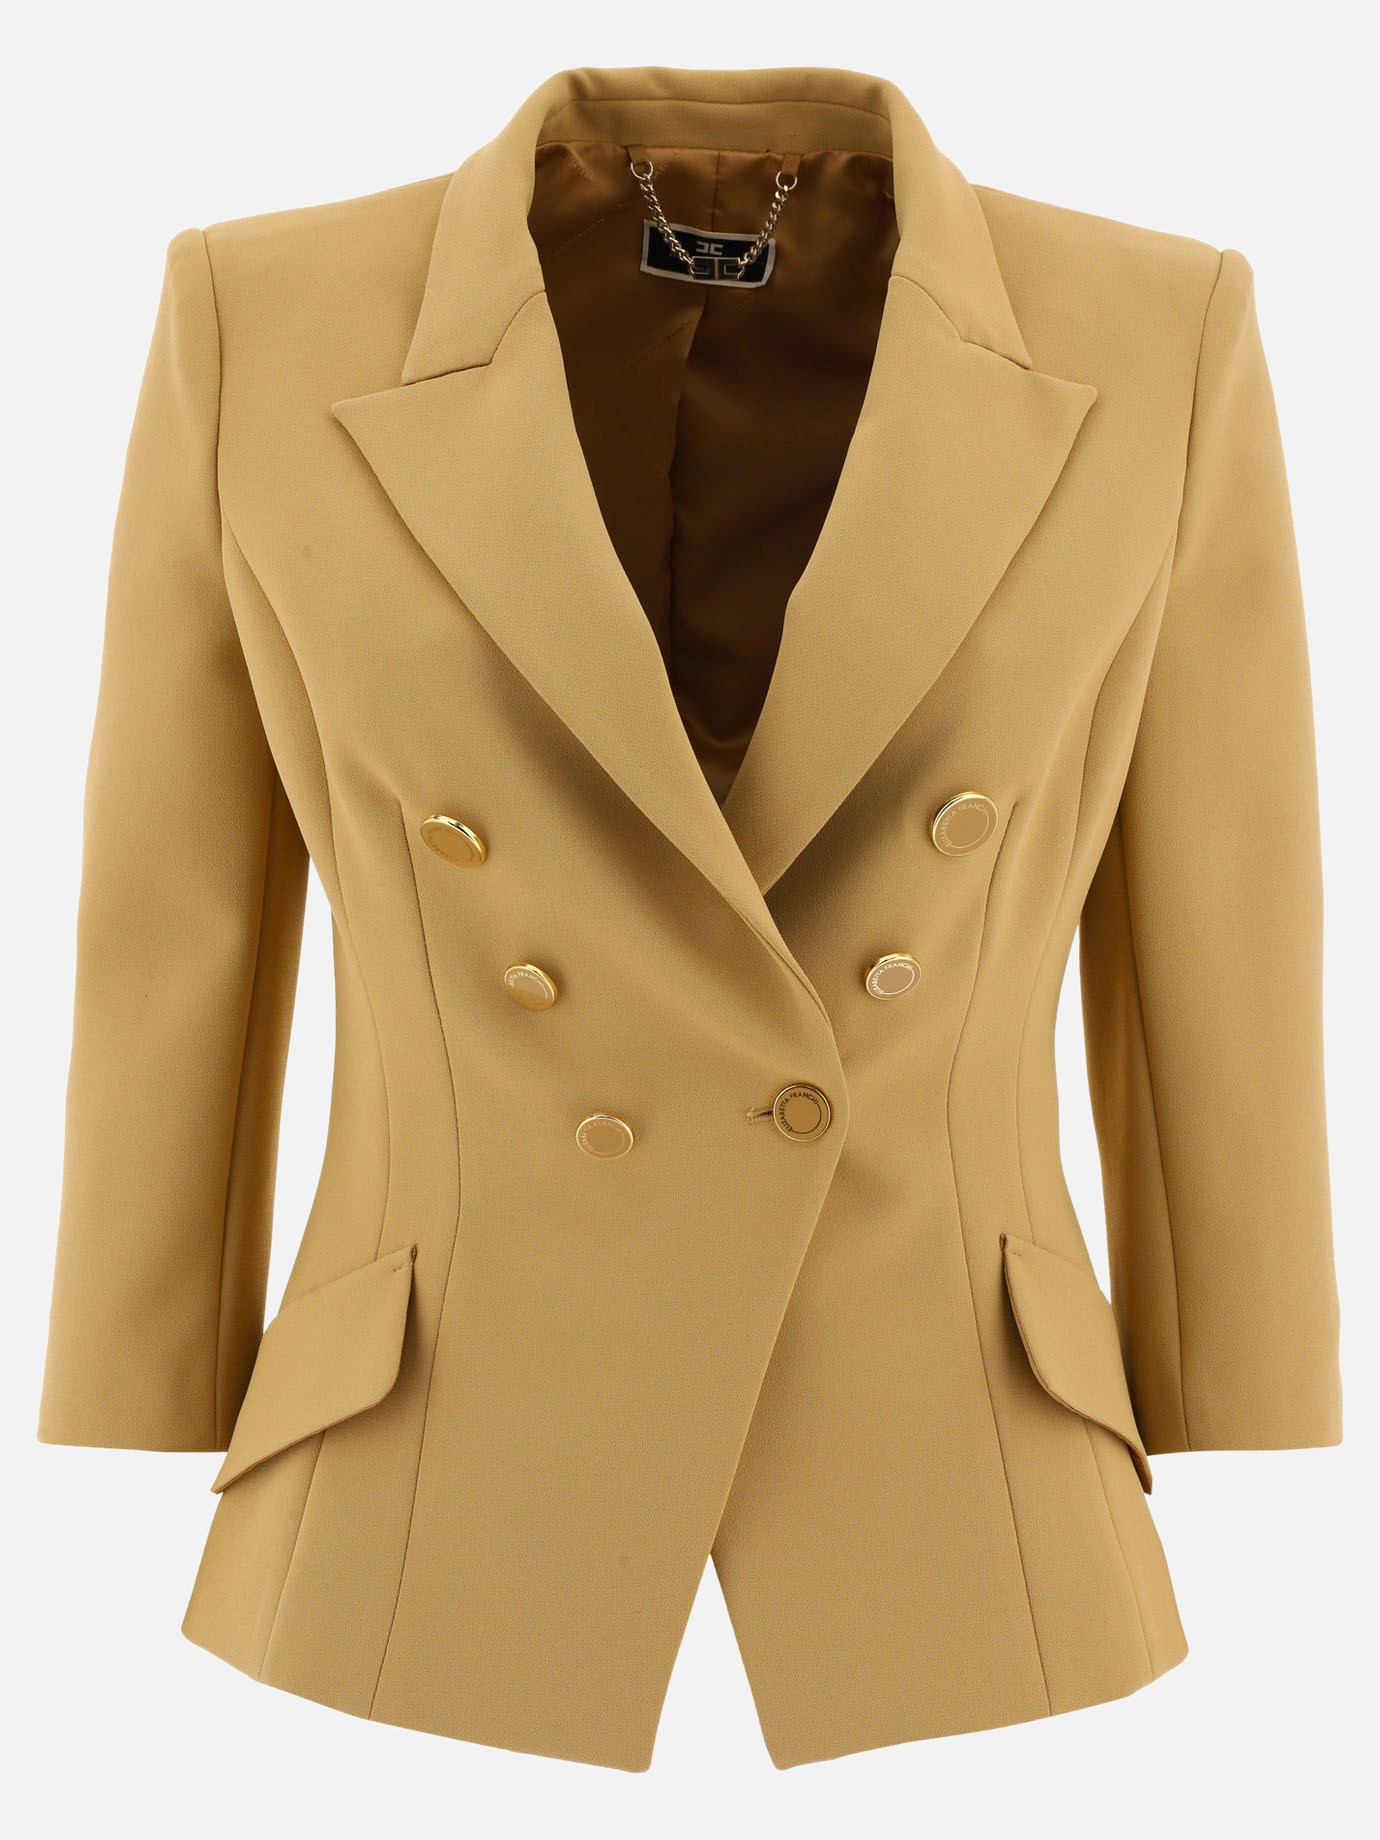 Double-breasted blazer with gold buttonsby Elisabetta Franchi - 0